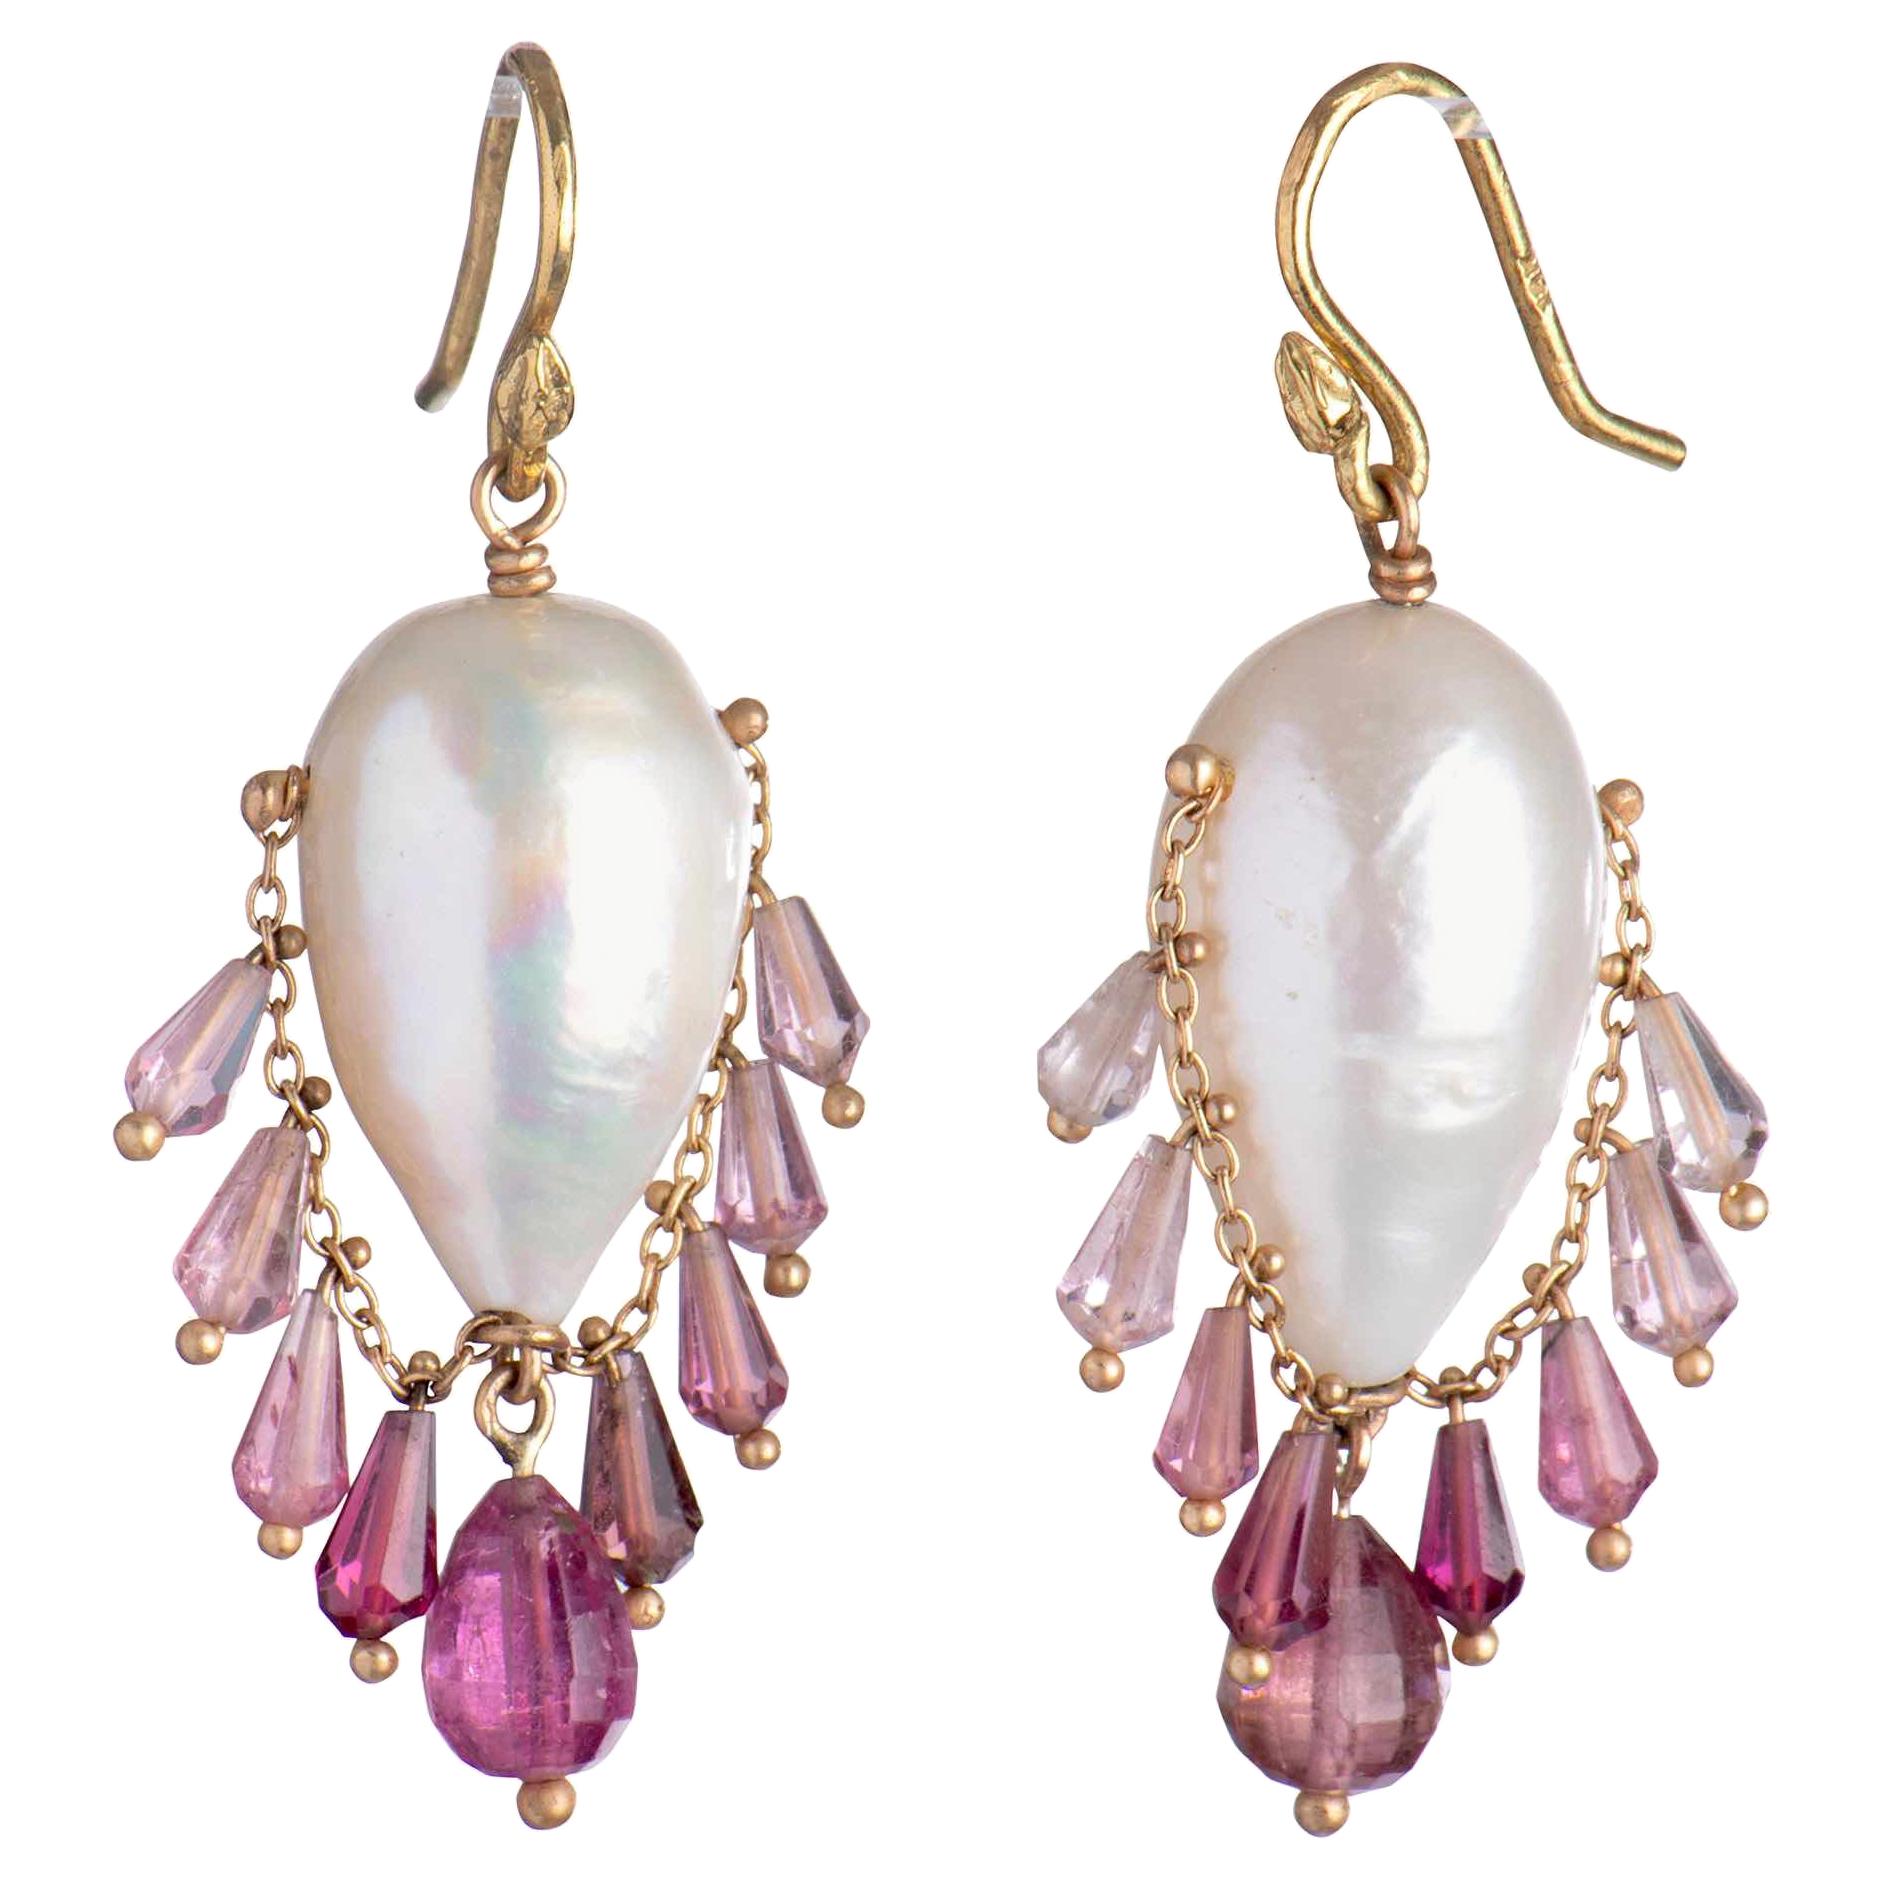 Gabrielle Sanchez South Sea Pearl and Ombre Pink Tourmaline 18k Fringe Earring